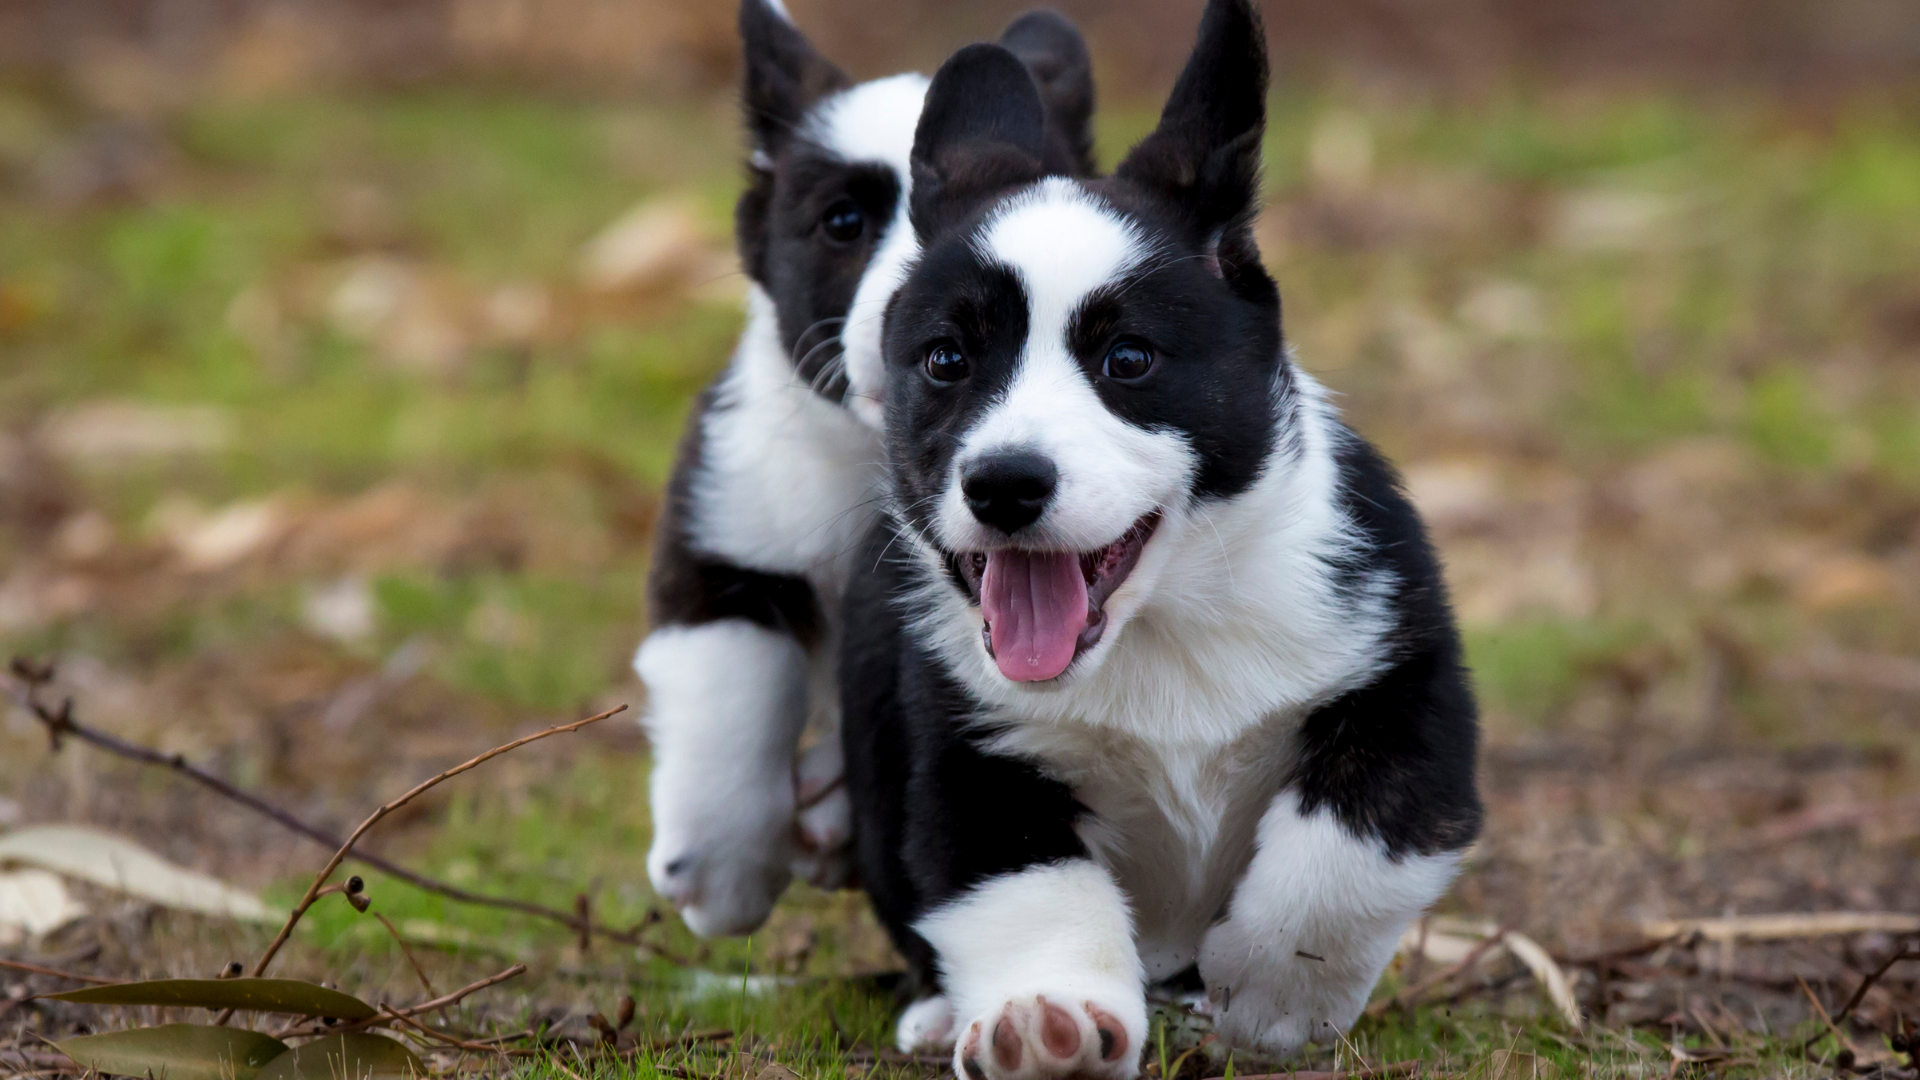 5 Ways to Socialize Your Puppy